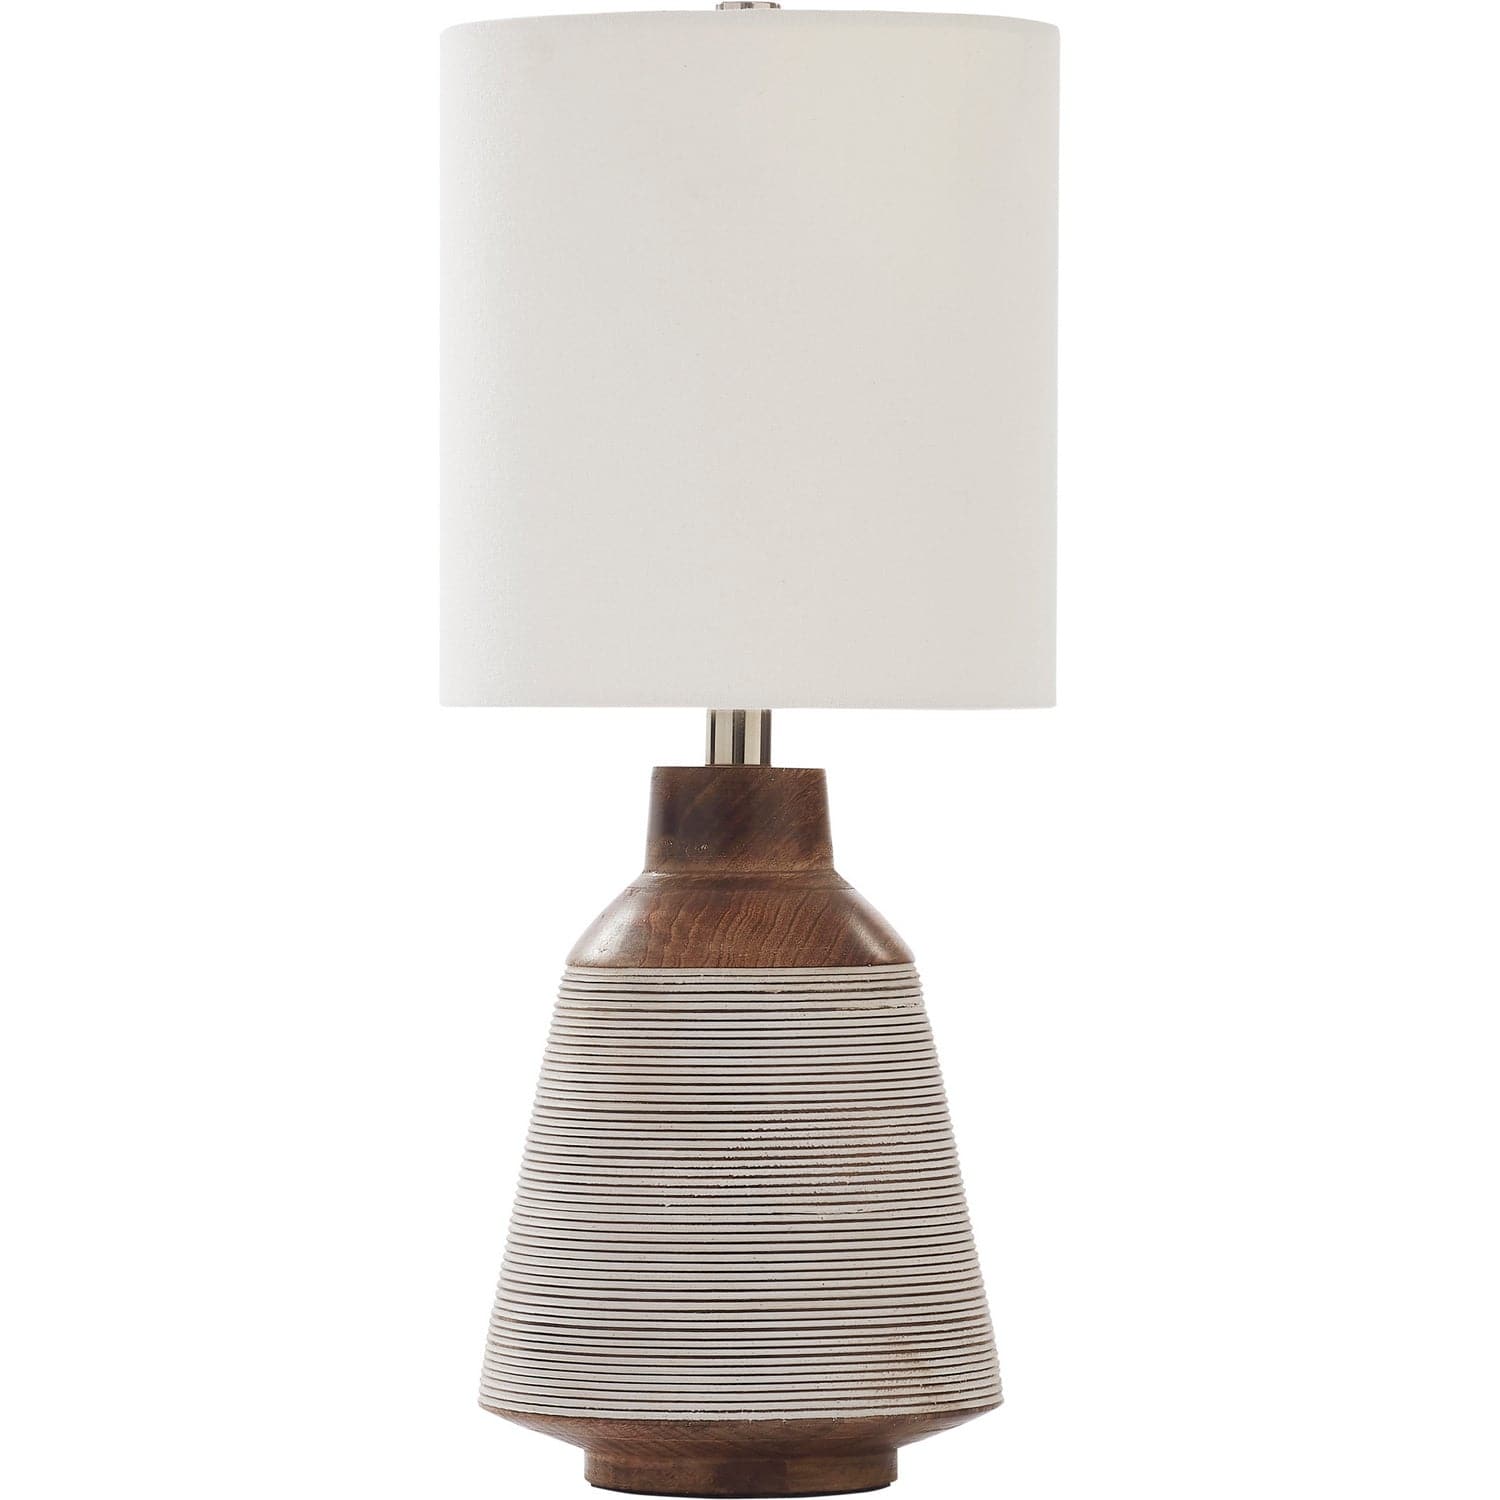 Renwil - LPT1159 - One Light Table Lamp - Botwood - Painted Walnut With Whitewash